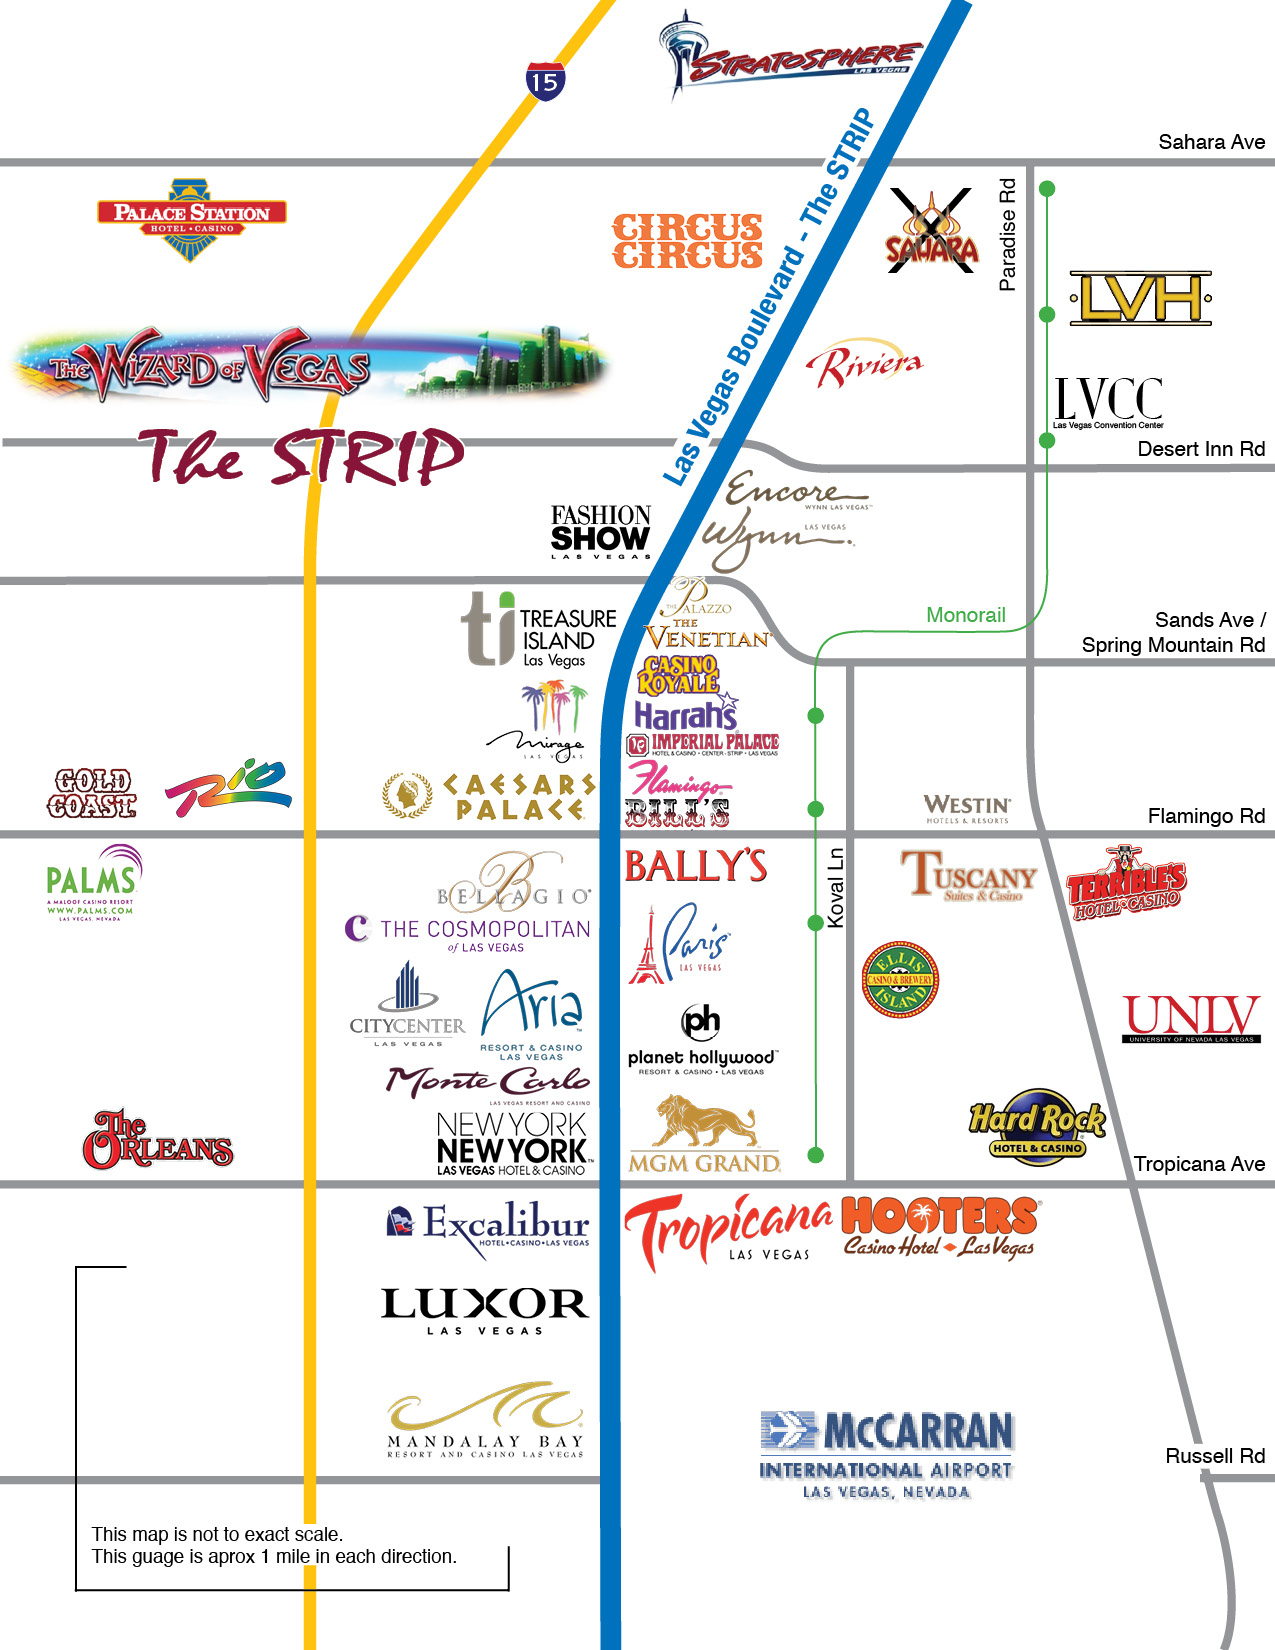 tuscany suites and casino on strip map